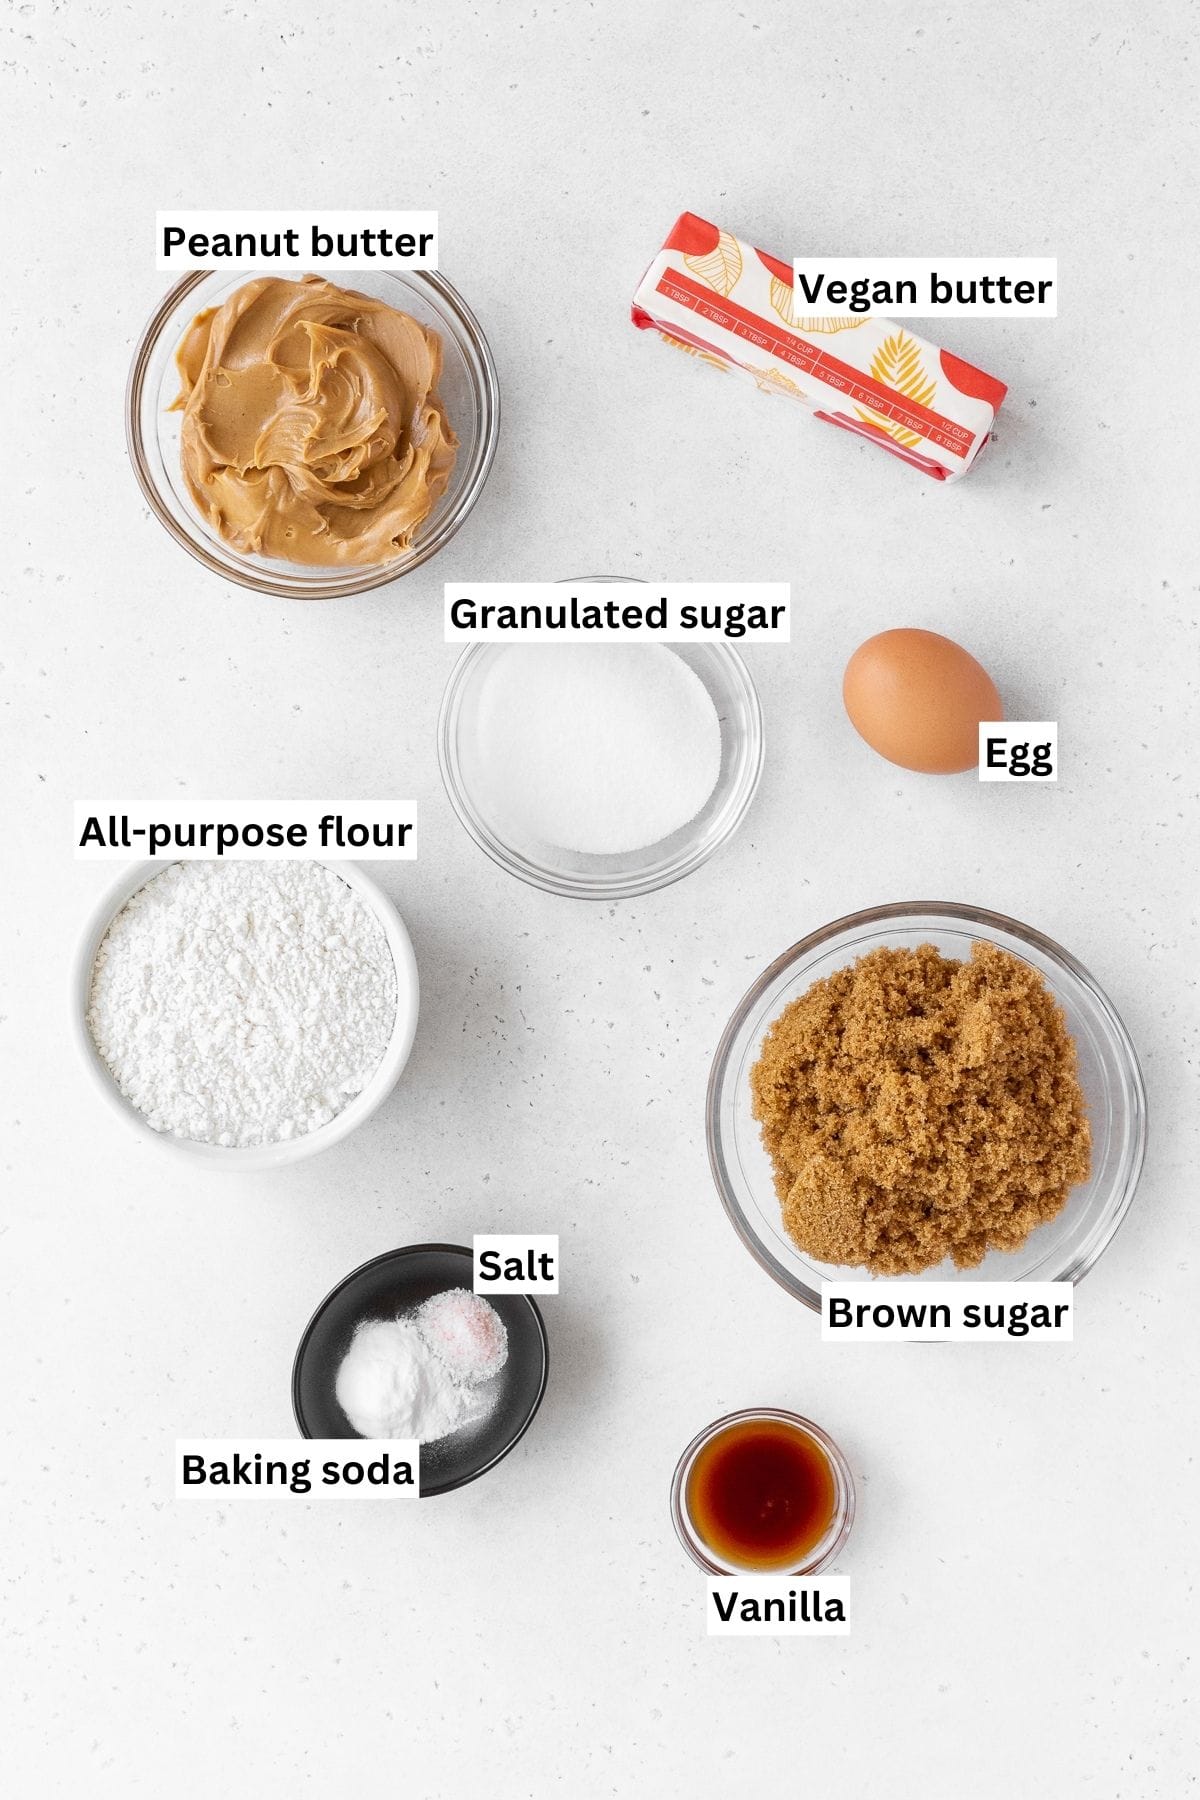 All of the ingredients for dairy-free peanut butter cookies.